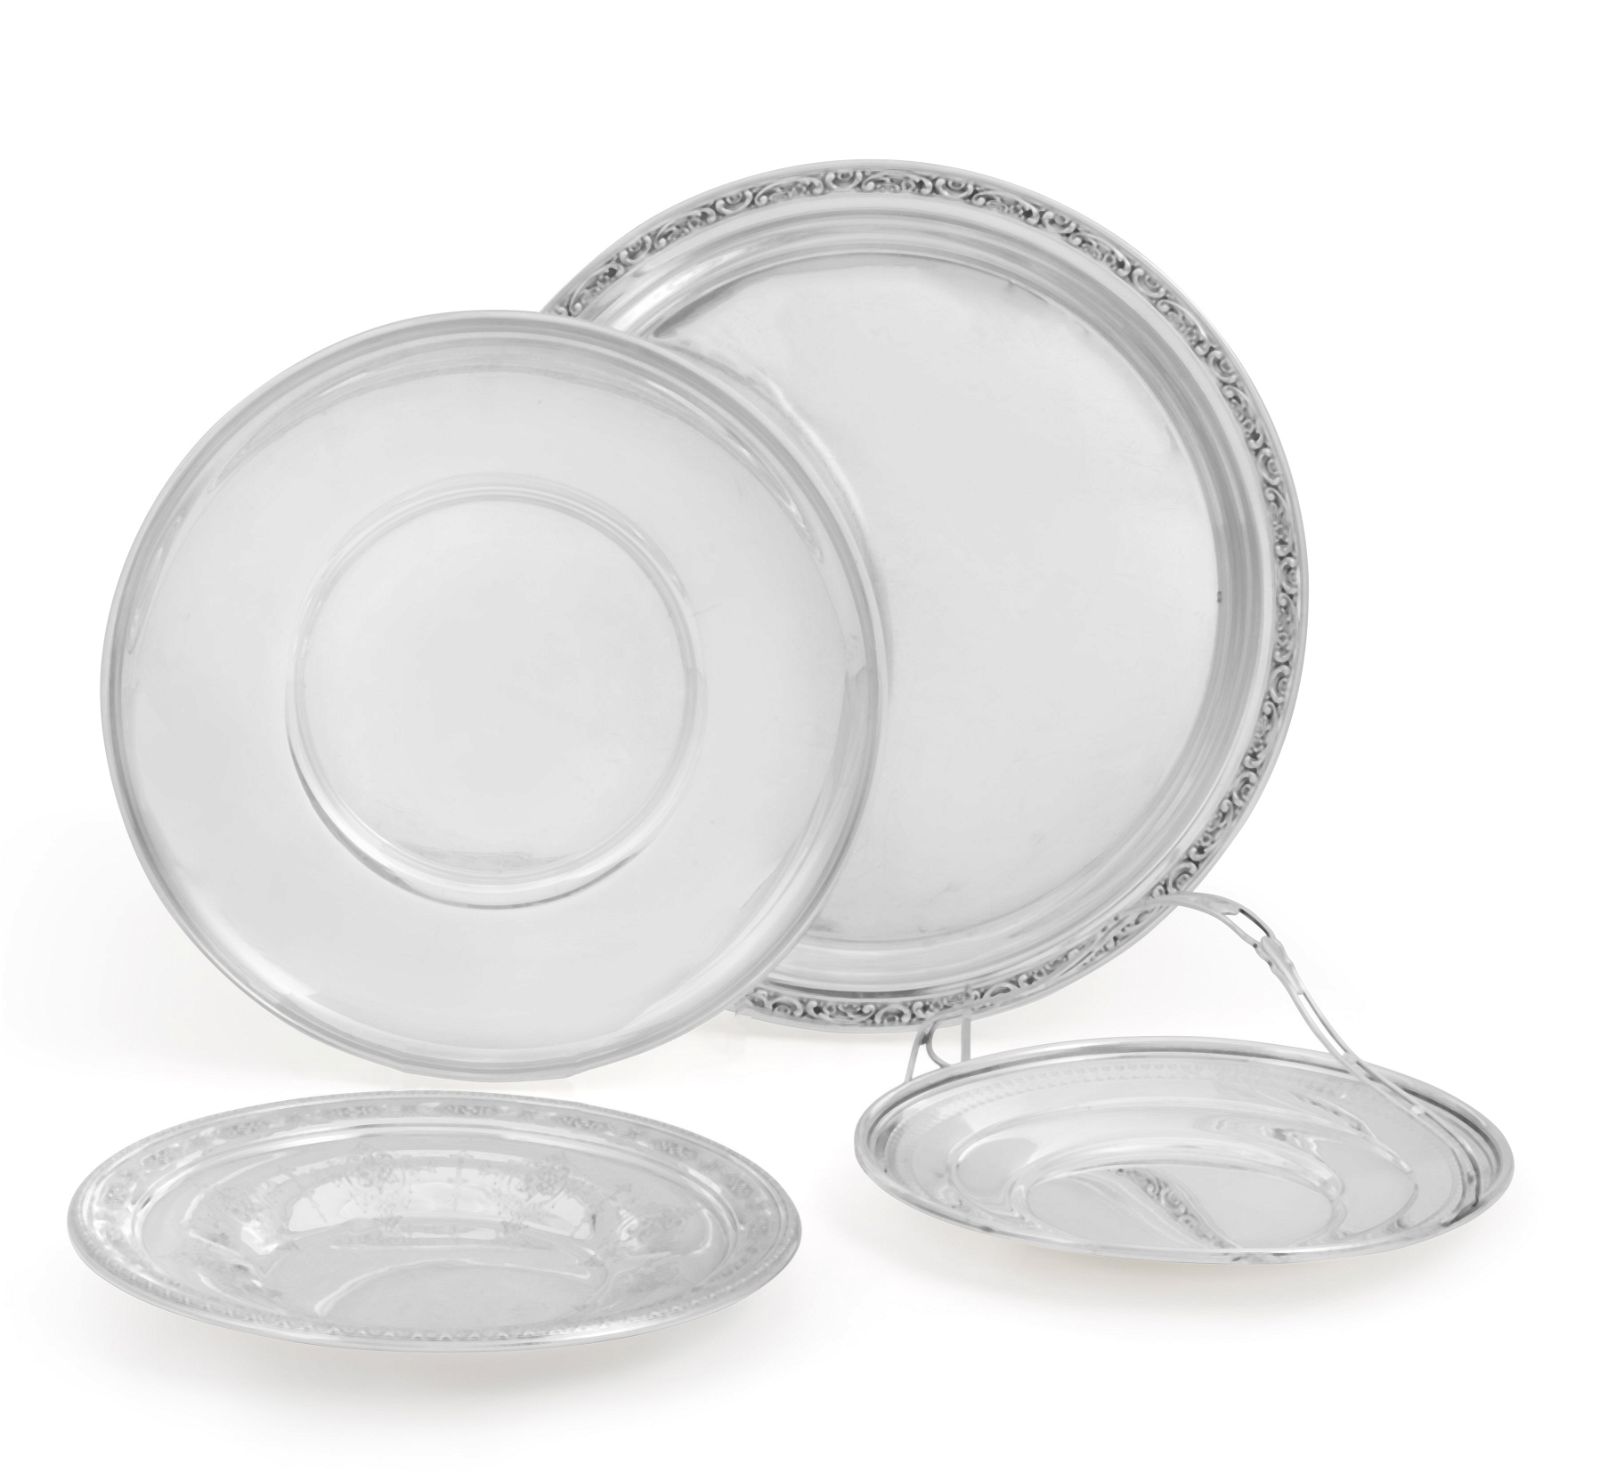 FOUR STERLING SILVER SERVING DISHESFour